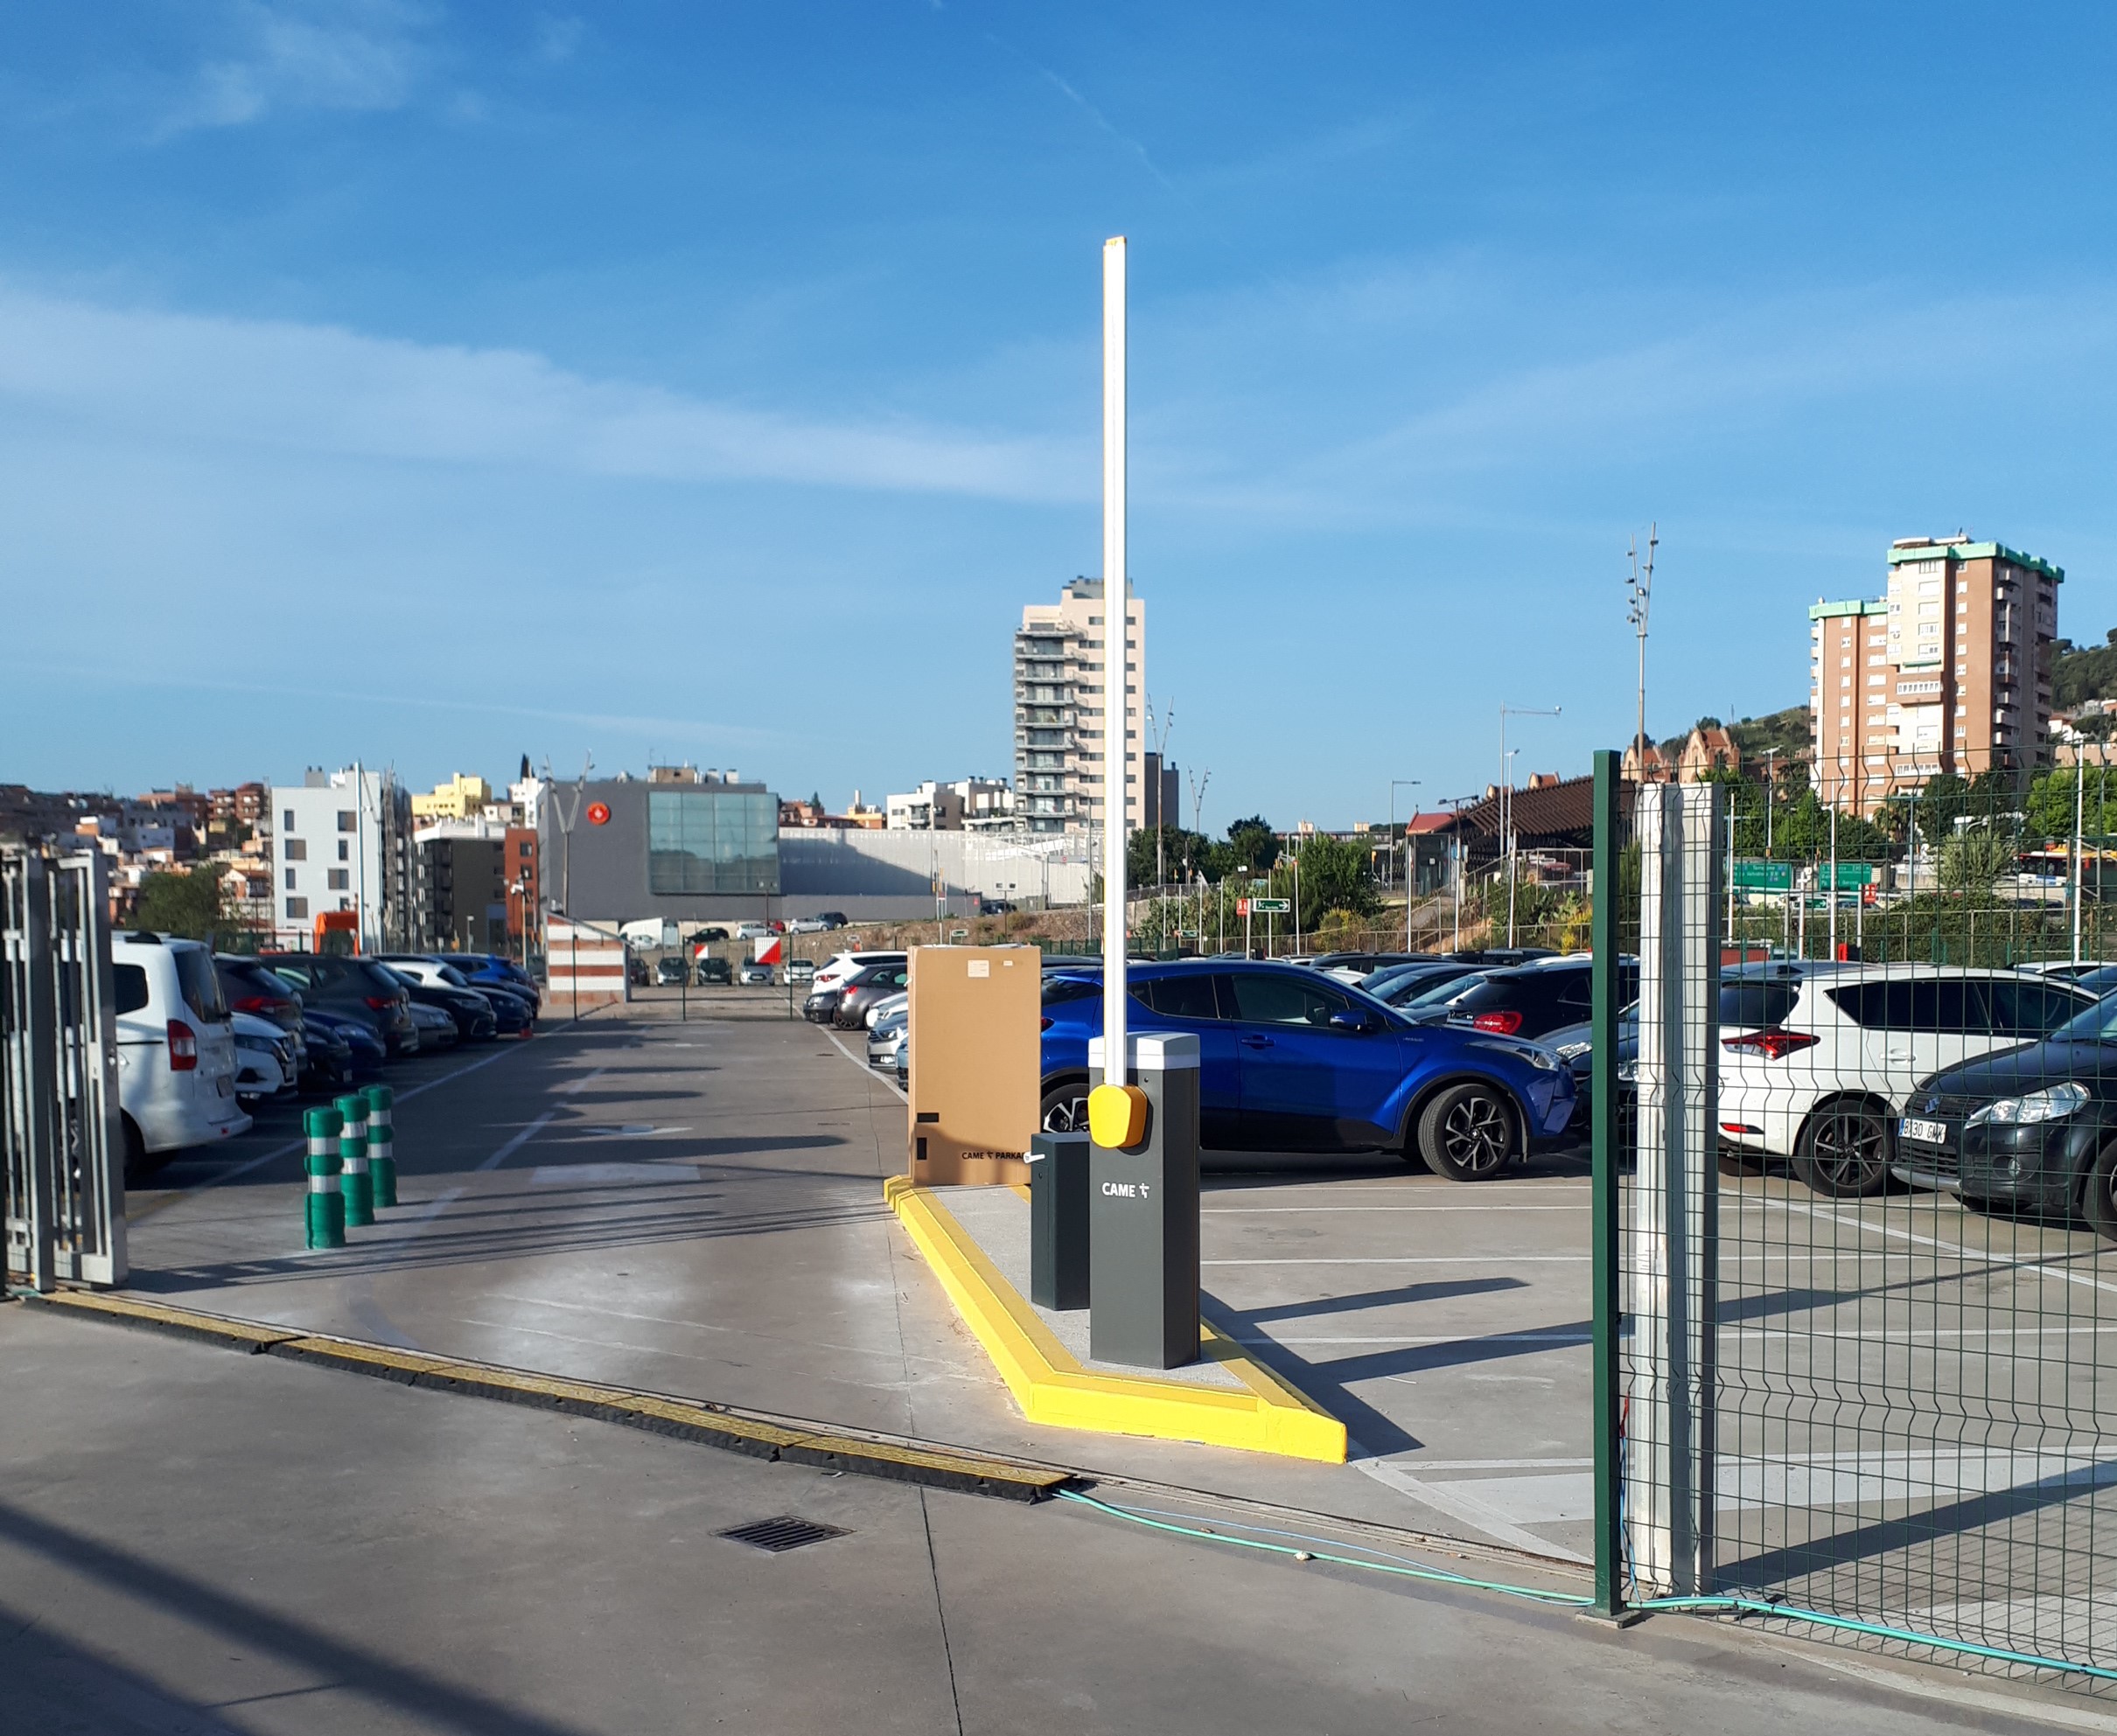 BSM Basic Park Vall d'Hebron doubles its number of parking spaces